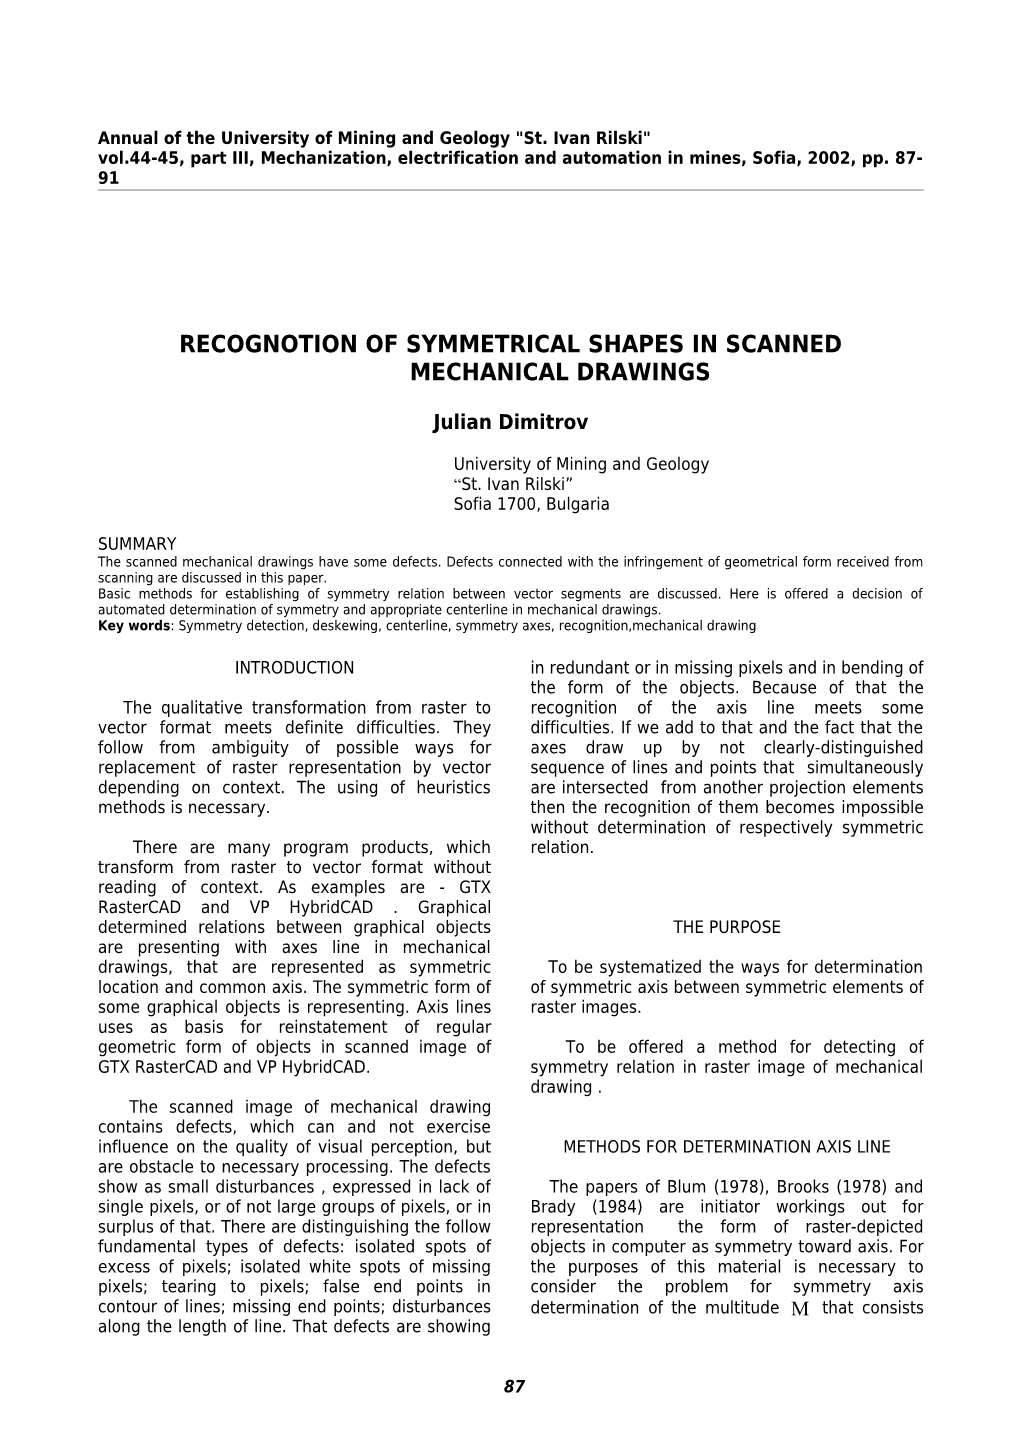 Recognition of Symmetrical Shapes in Scanned Mechanical Drawings